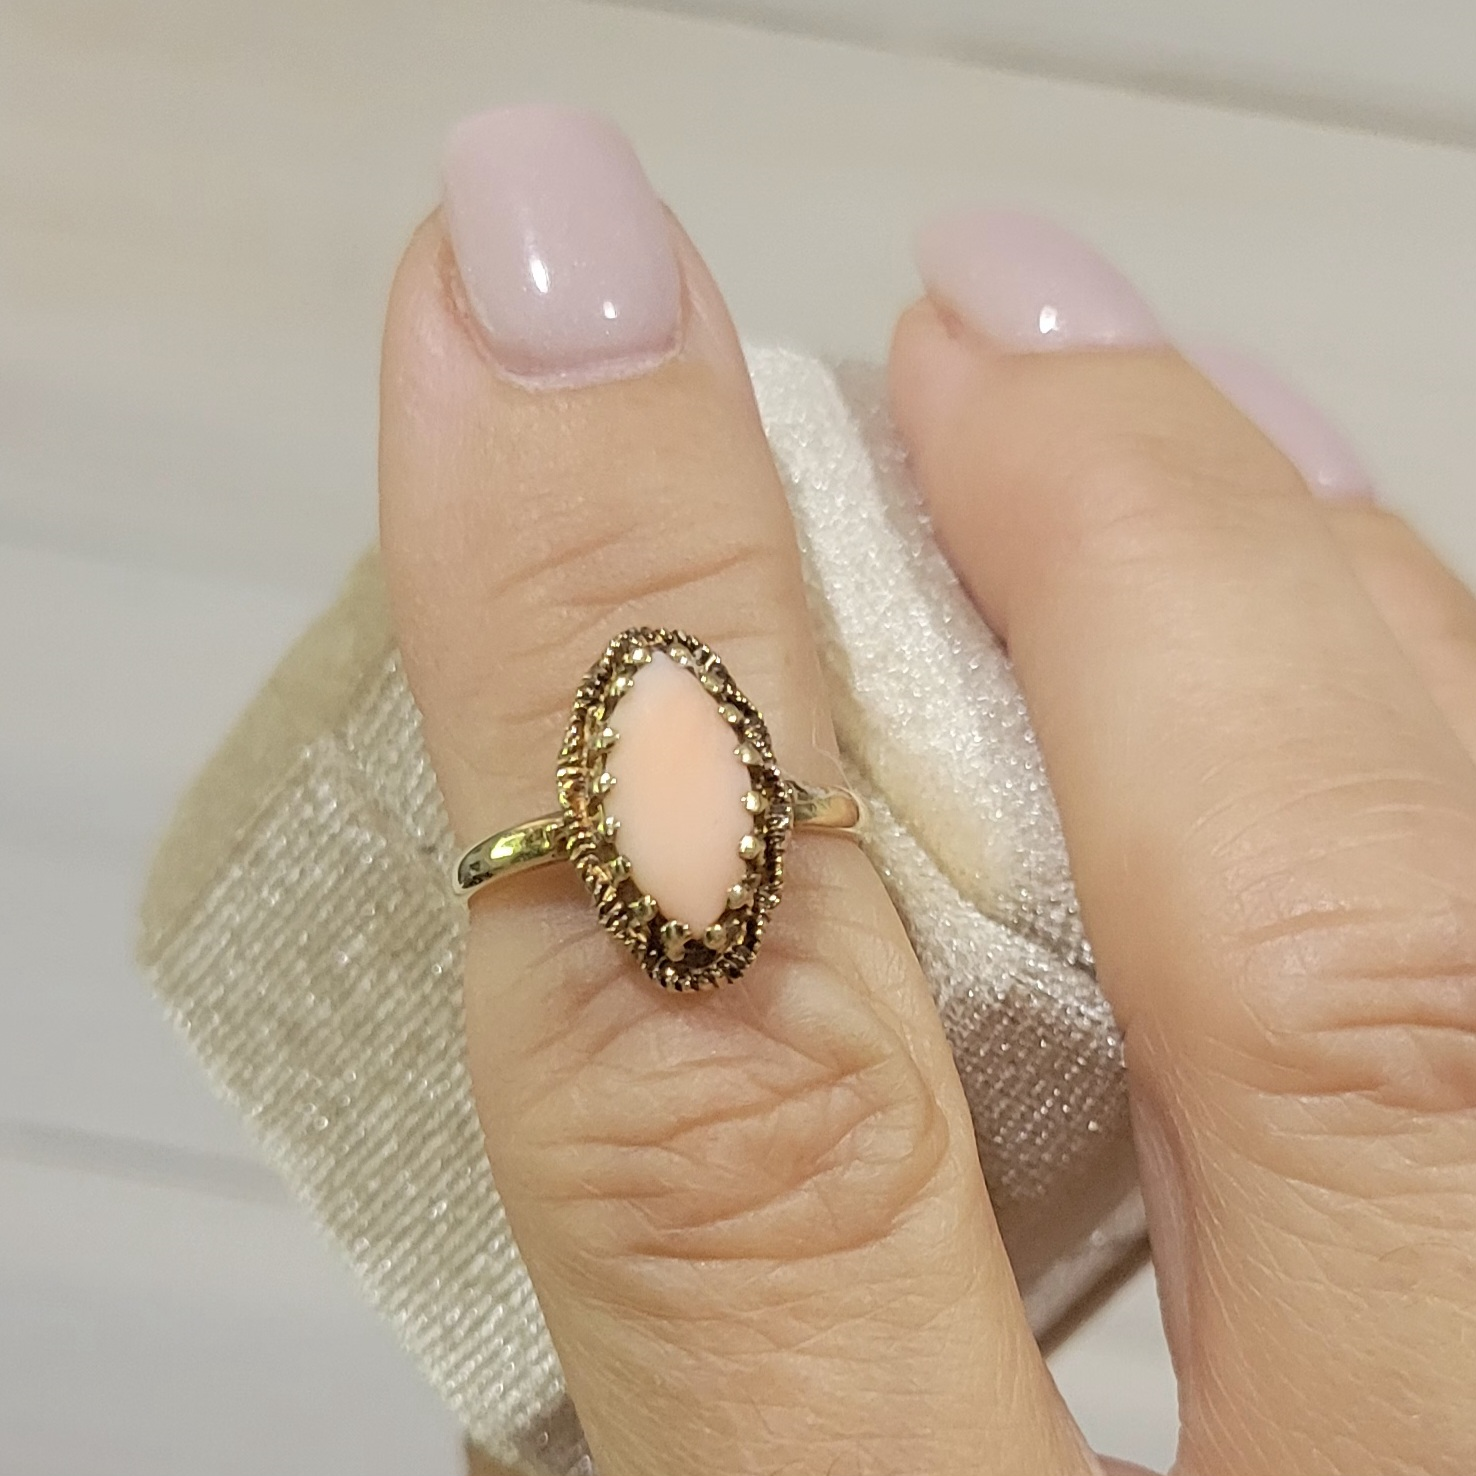 Vintage Coral 10K Yellow Gold Ring